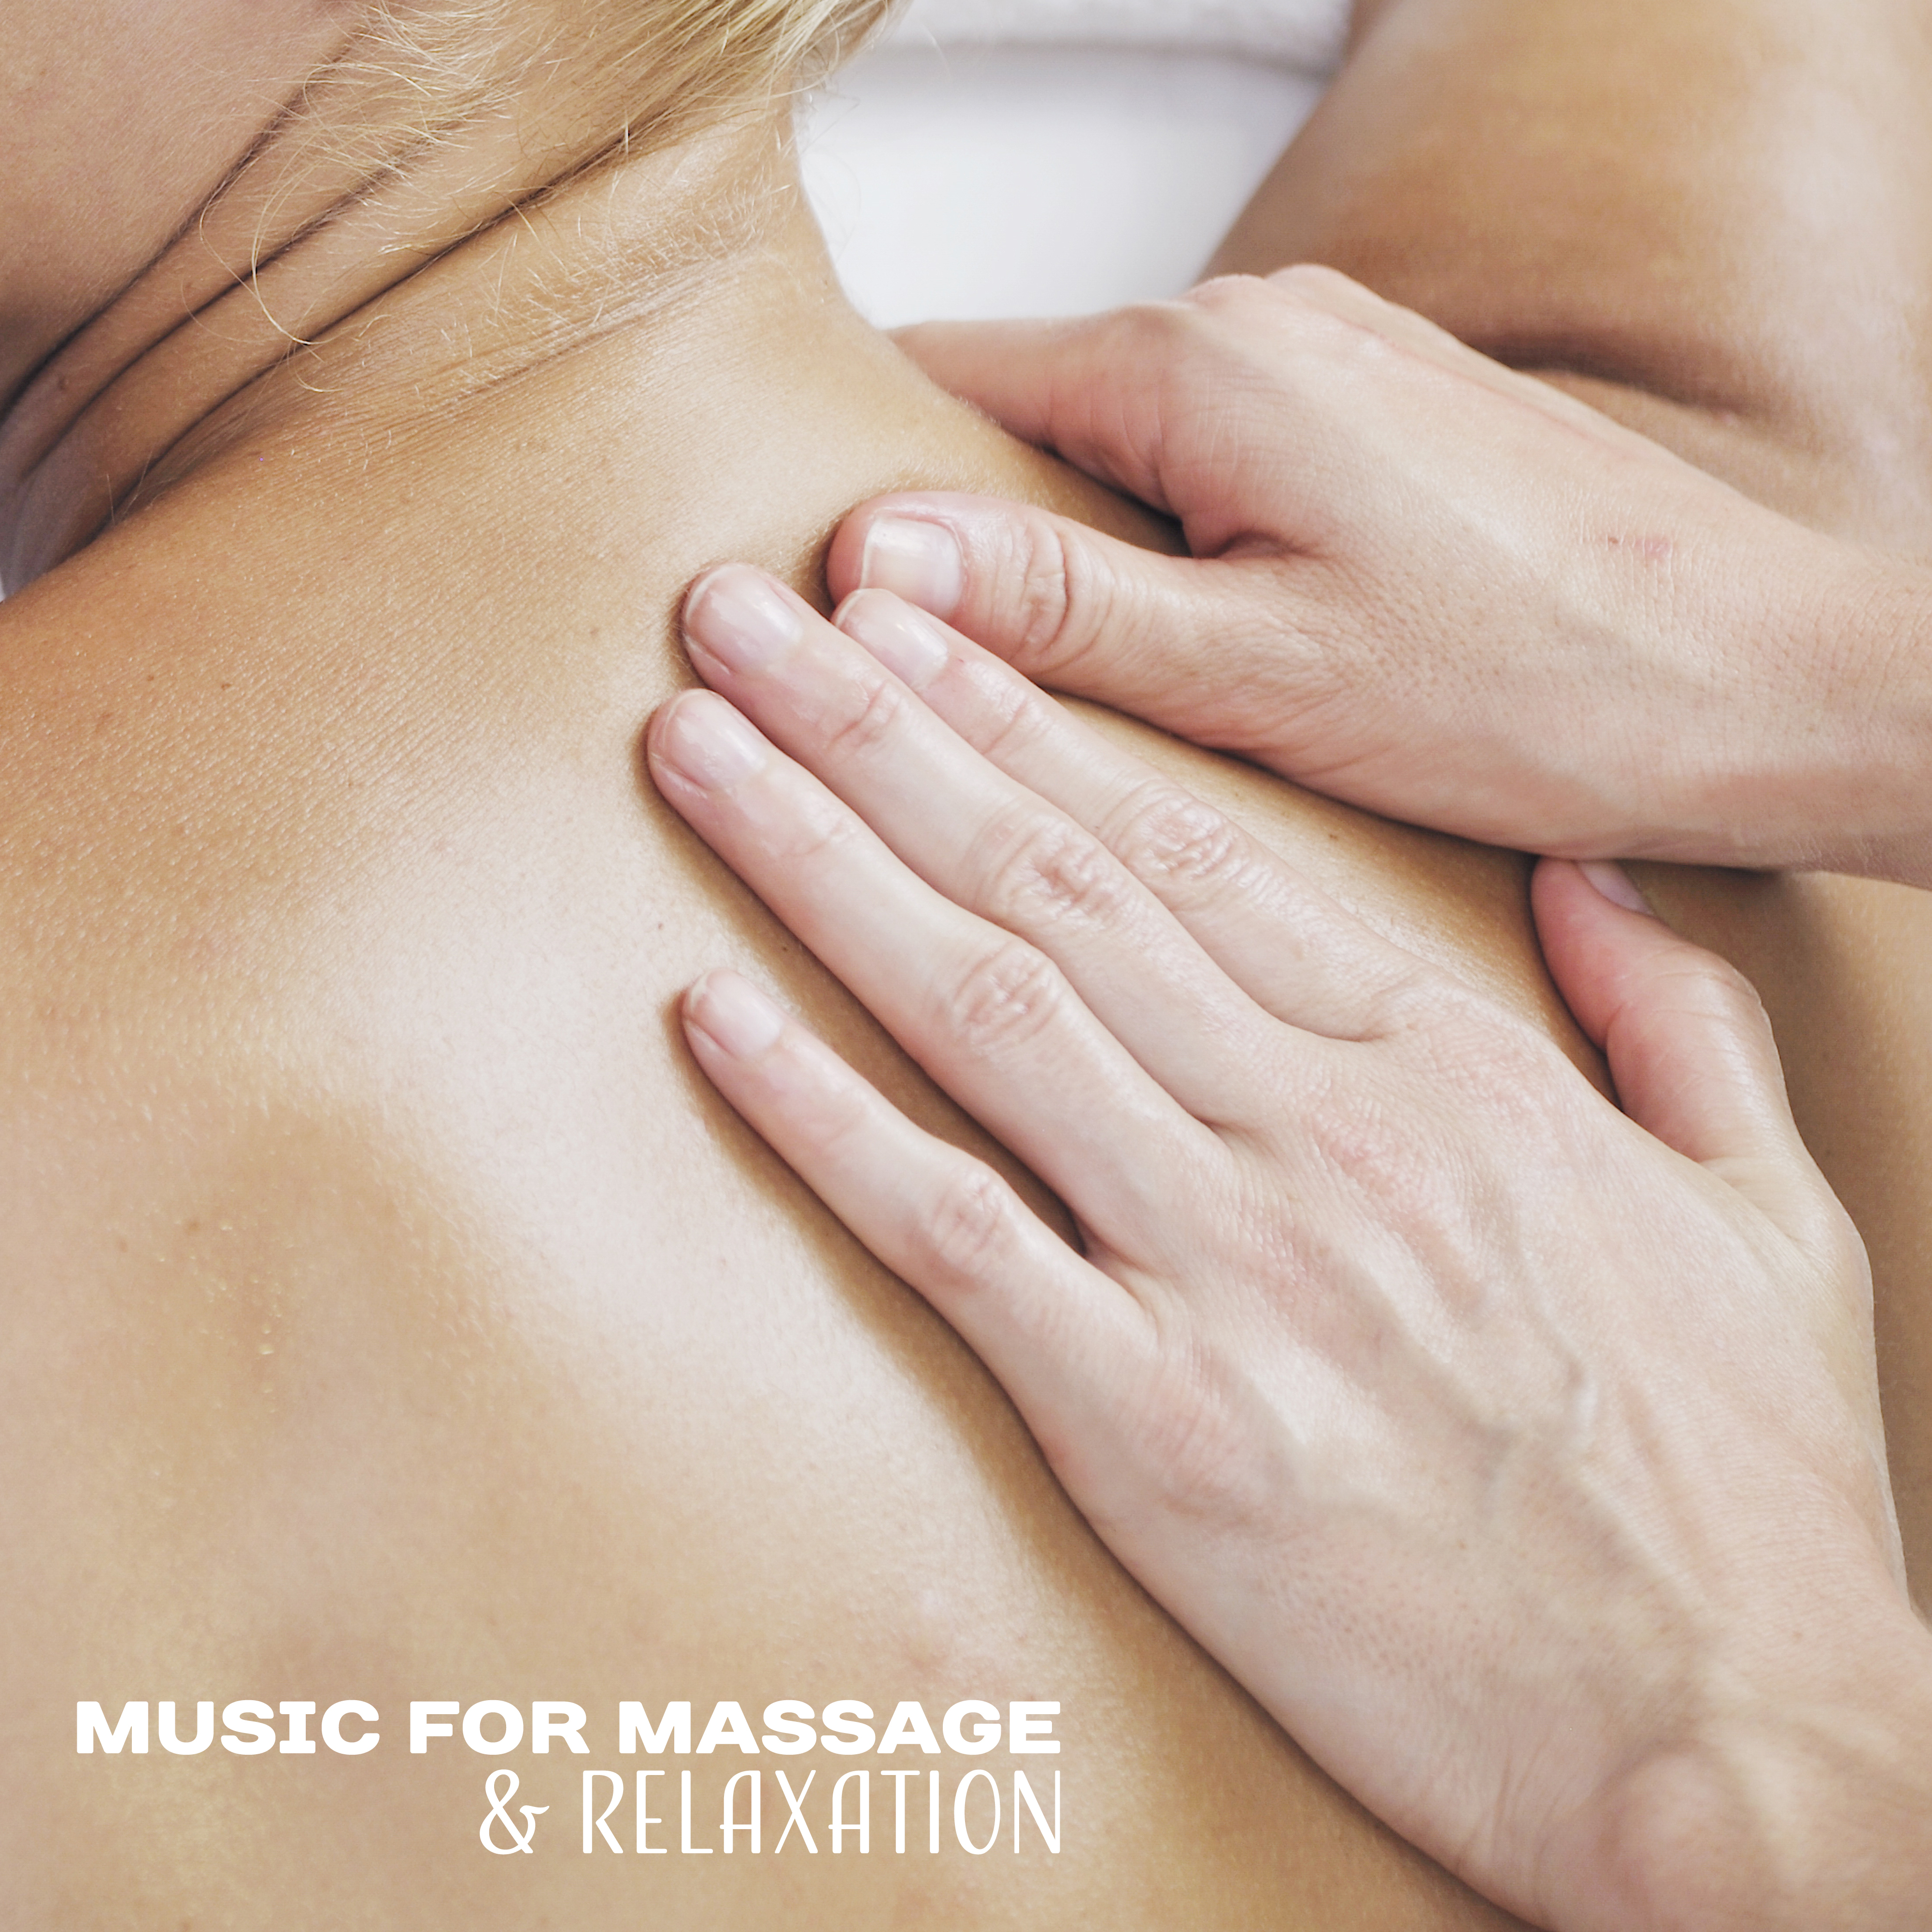 Music for Massage  Relaxation  Calming New Age Music, Nature Sounds Therapy, Reiki, Zen, Bliss